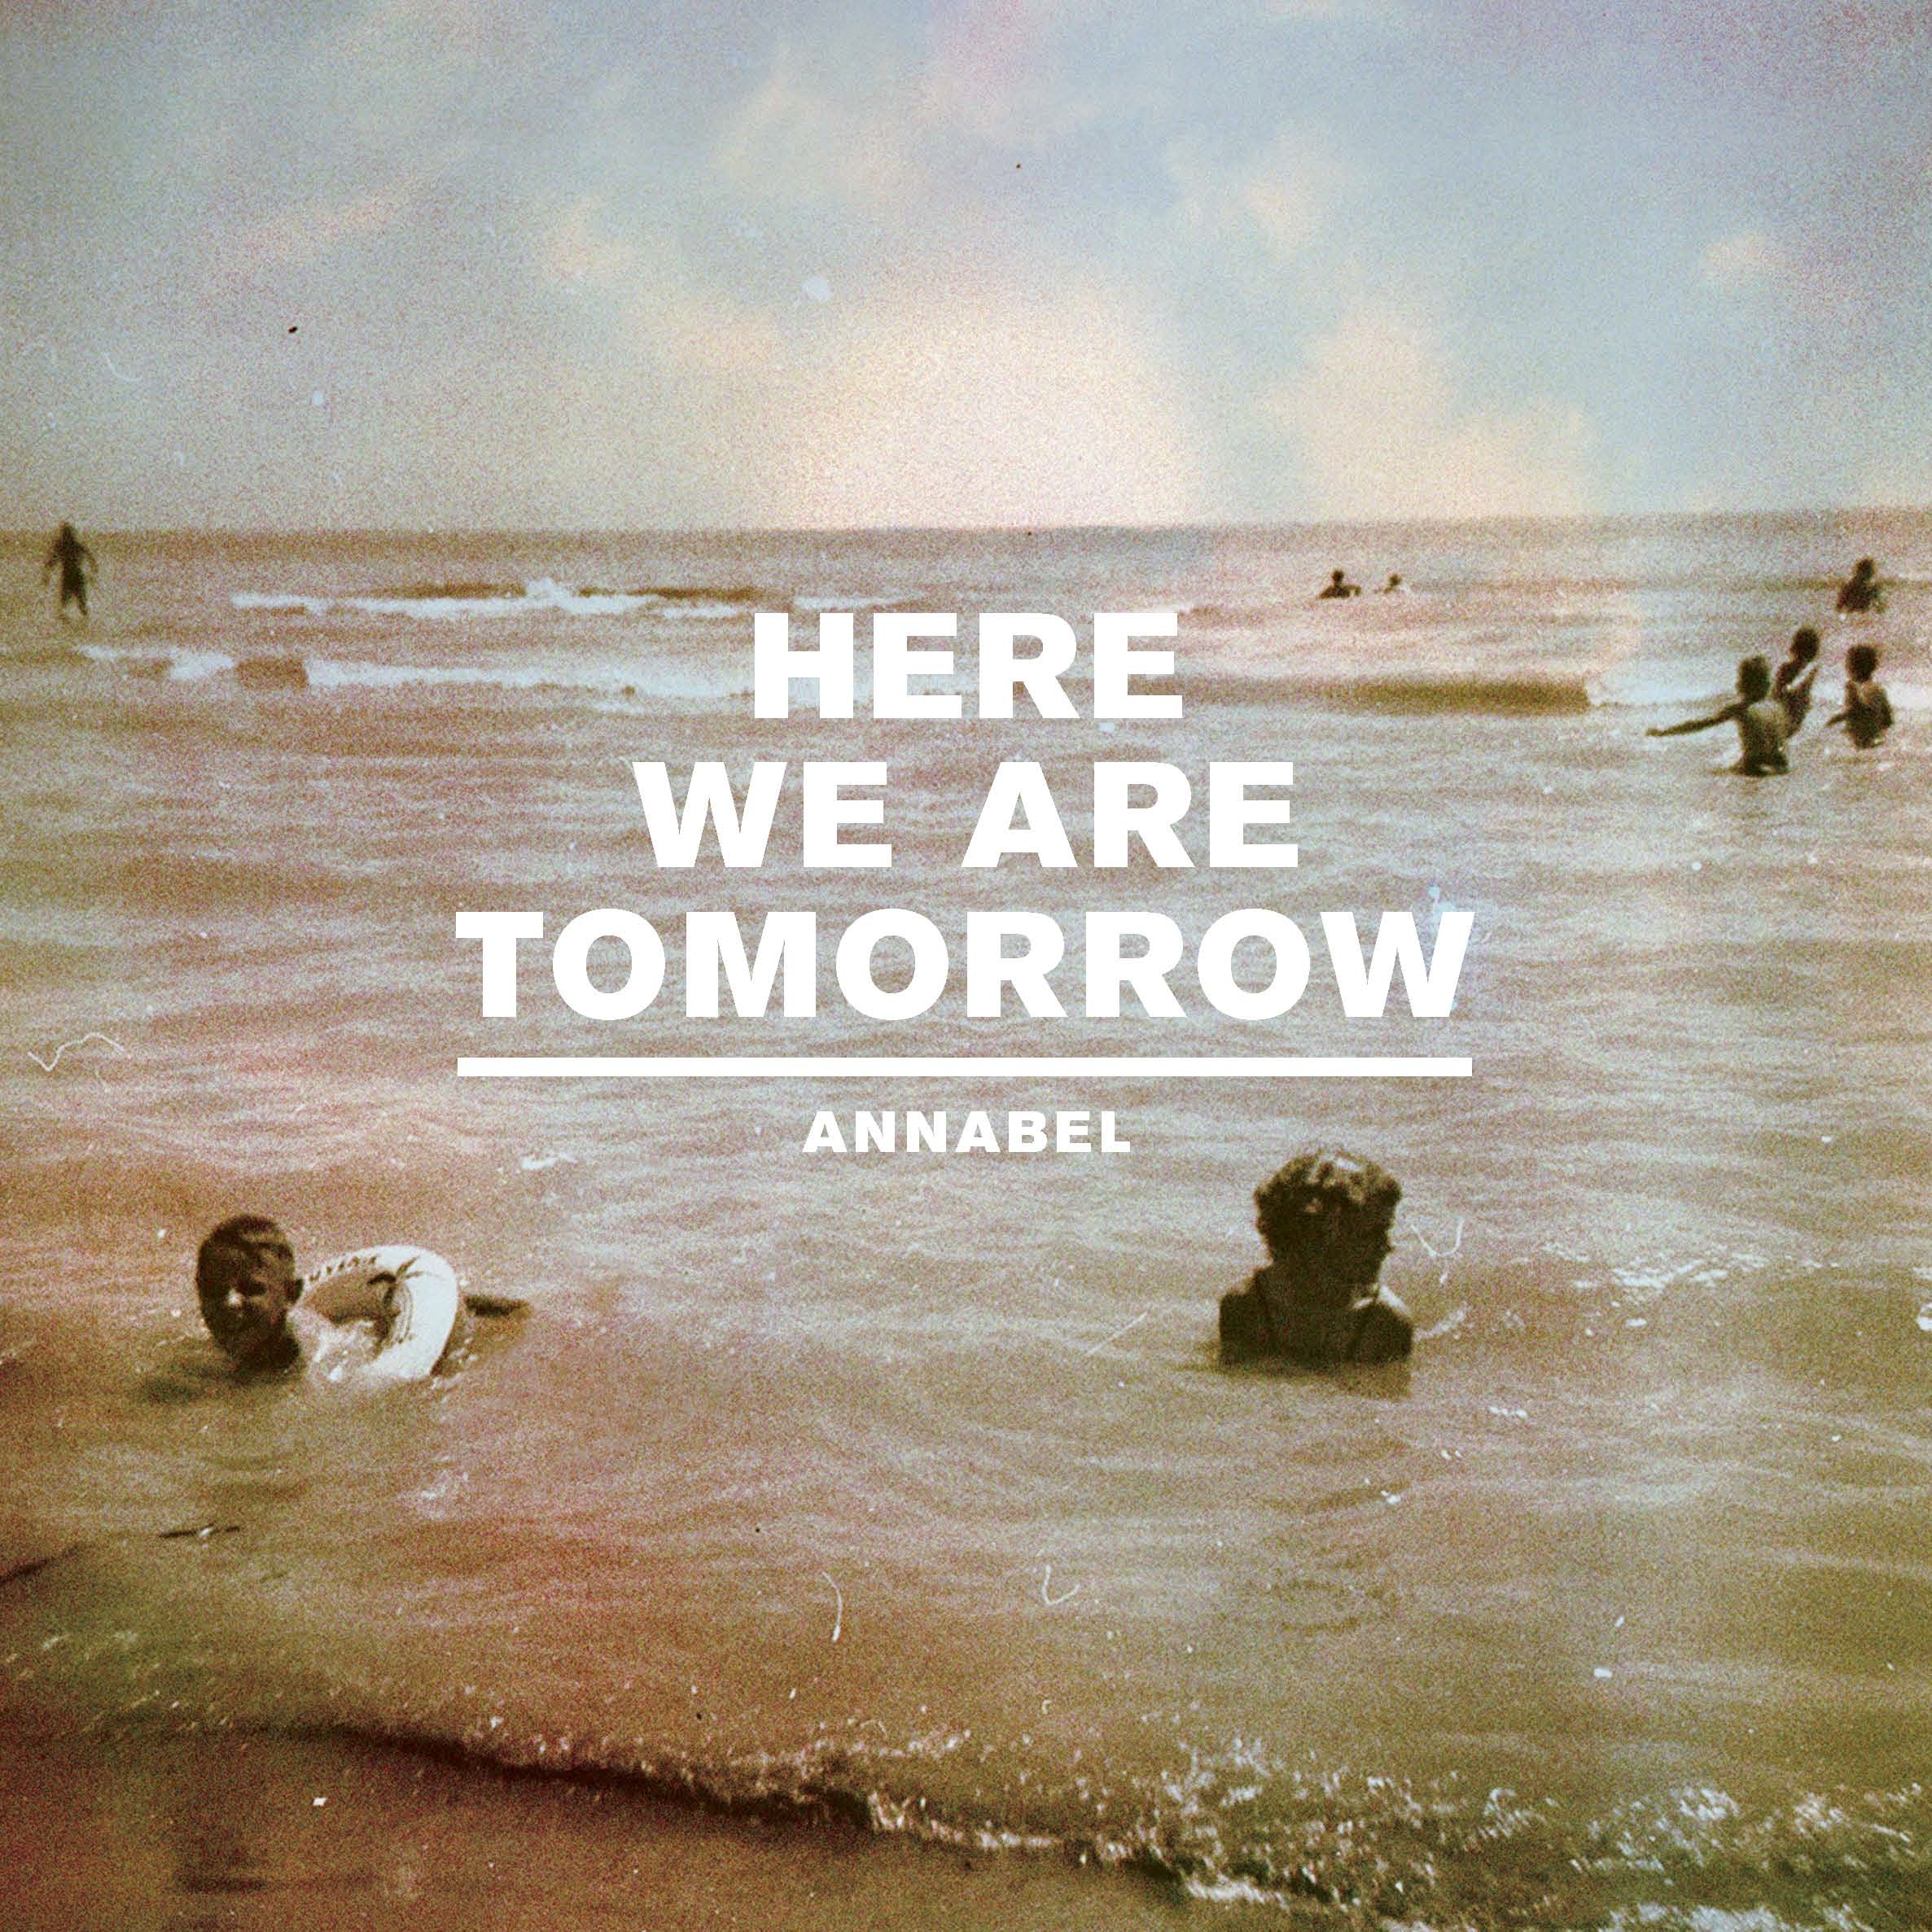 Annabel - Here We Are Tomorrow 7" (clear vinyl)